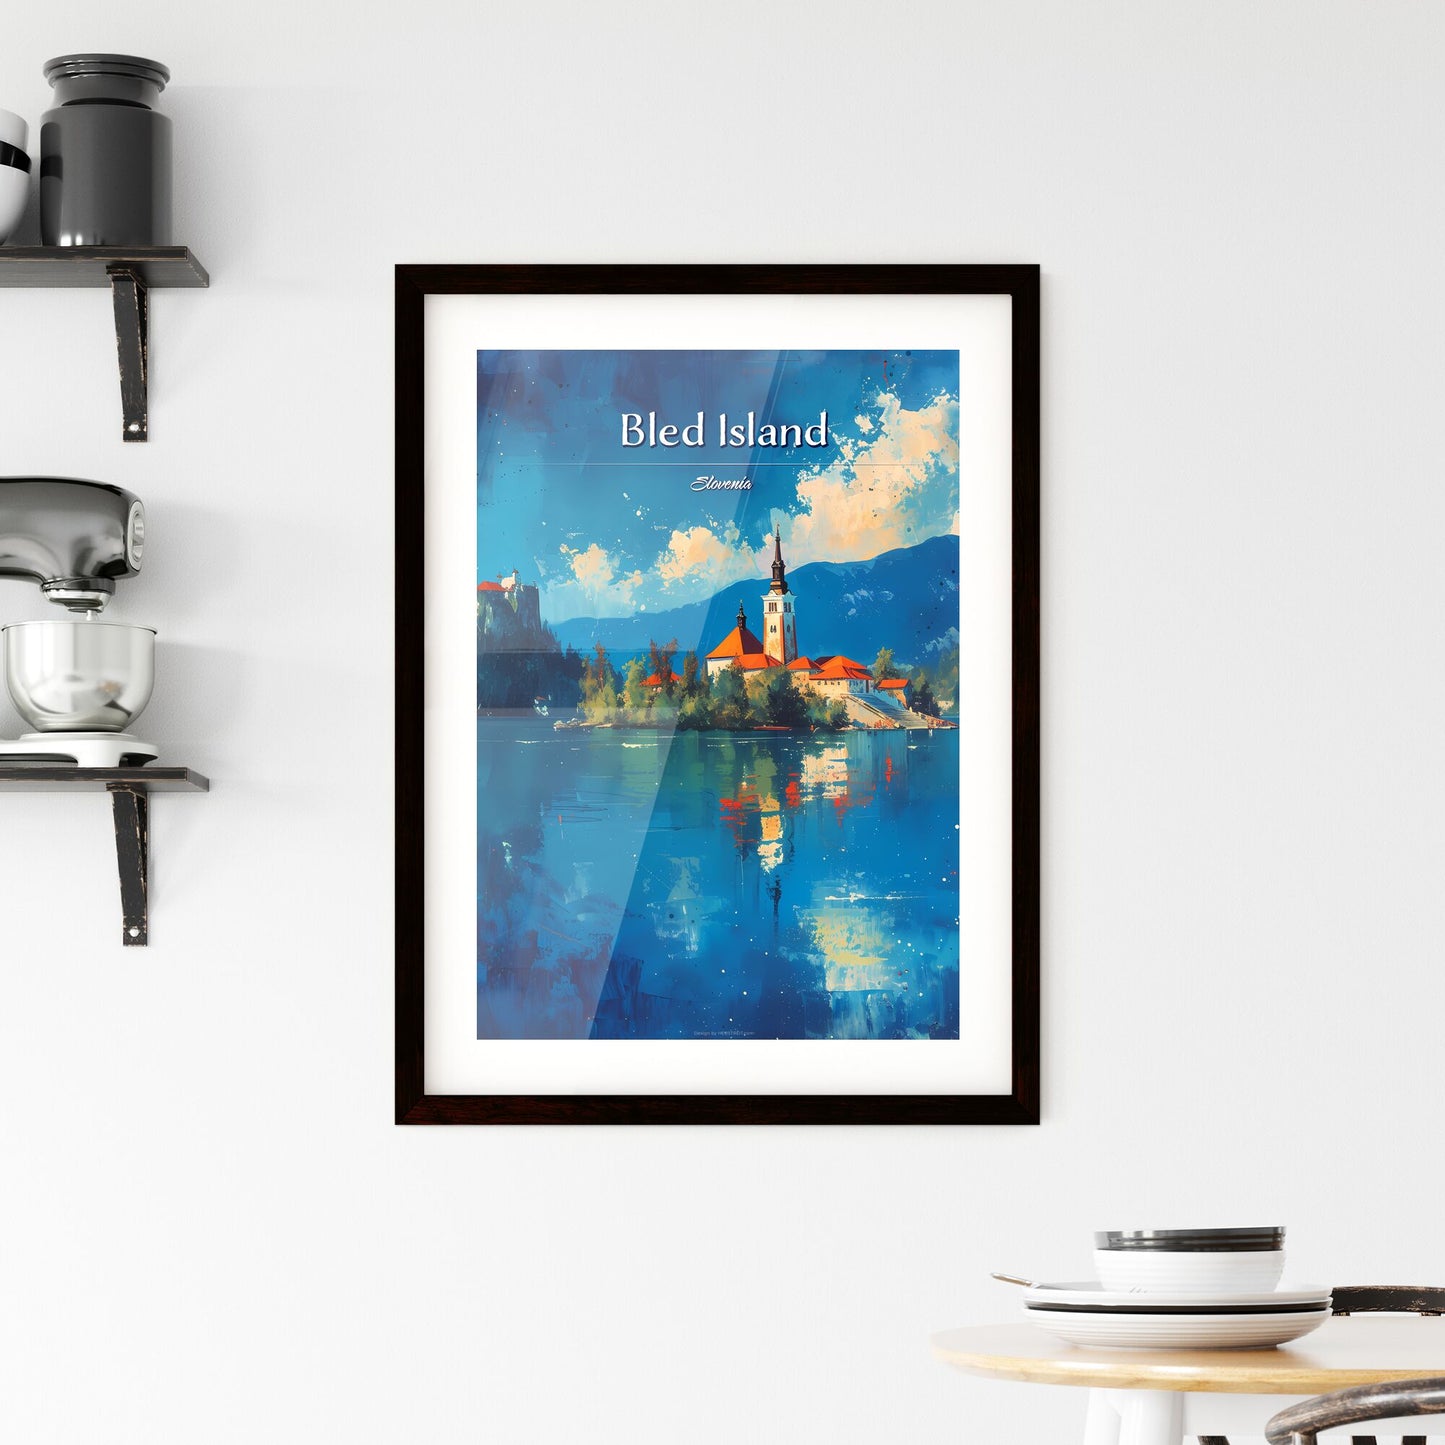 Bled Island, Slovenia - Art print of a building on an island in a lake Default Title